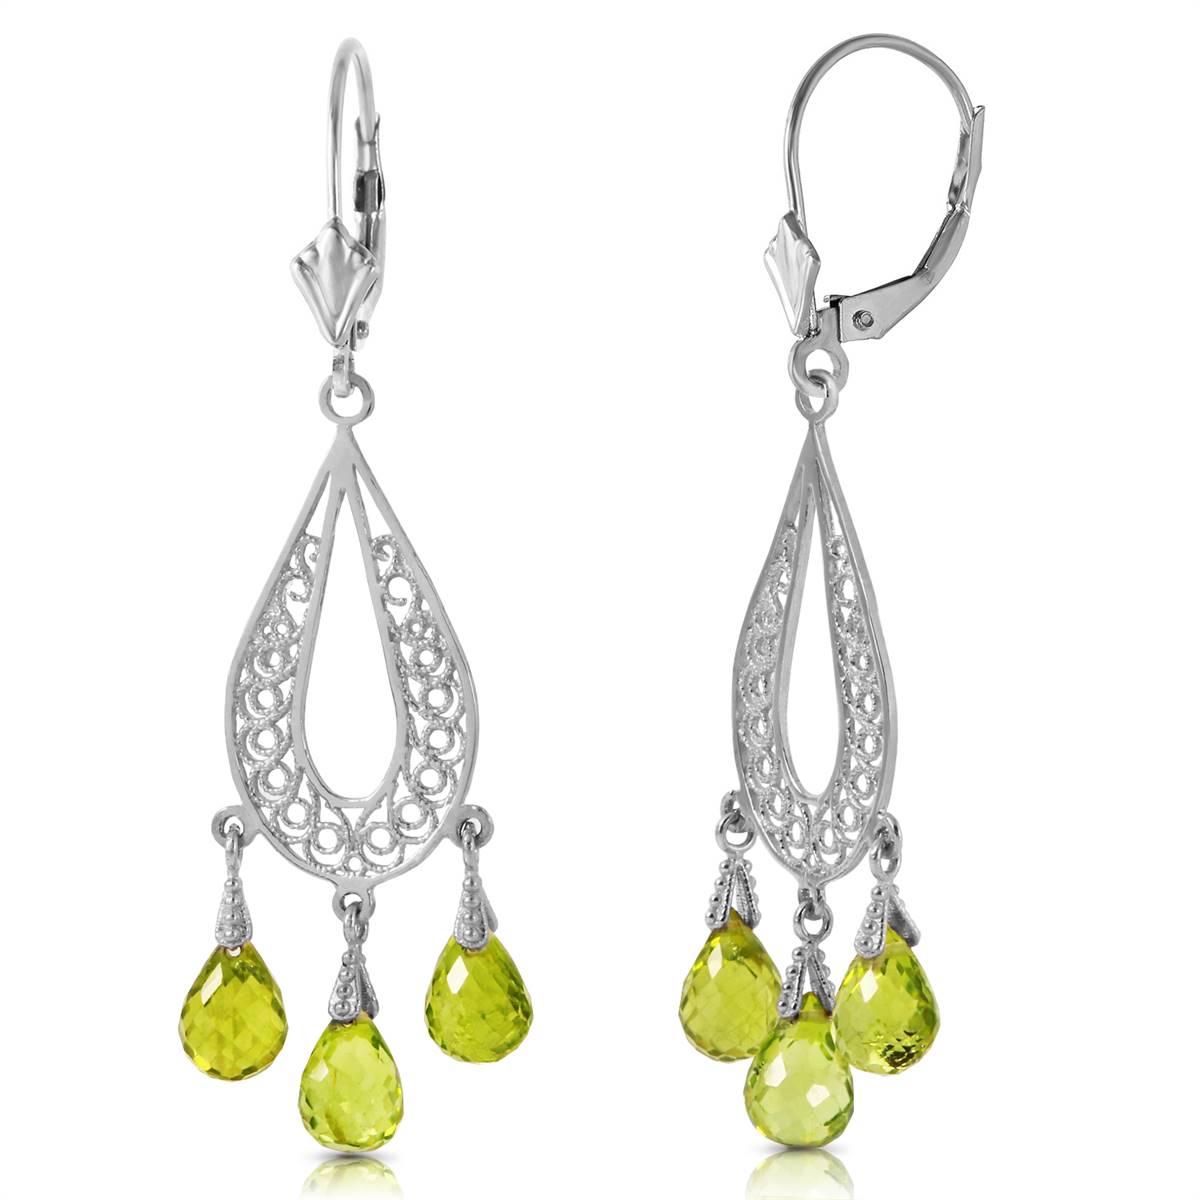 3.75 Carat 14K Solid White Gold Chandelier Earrings Natural Peridot